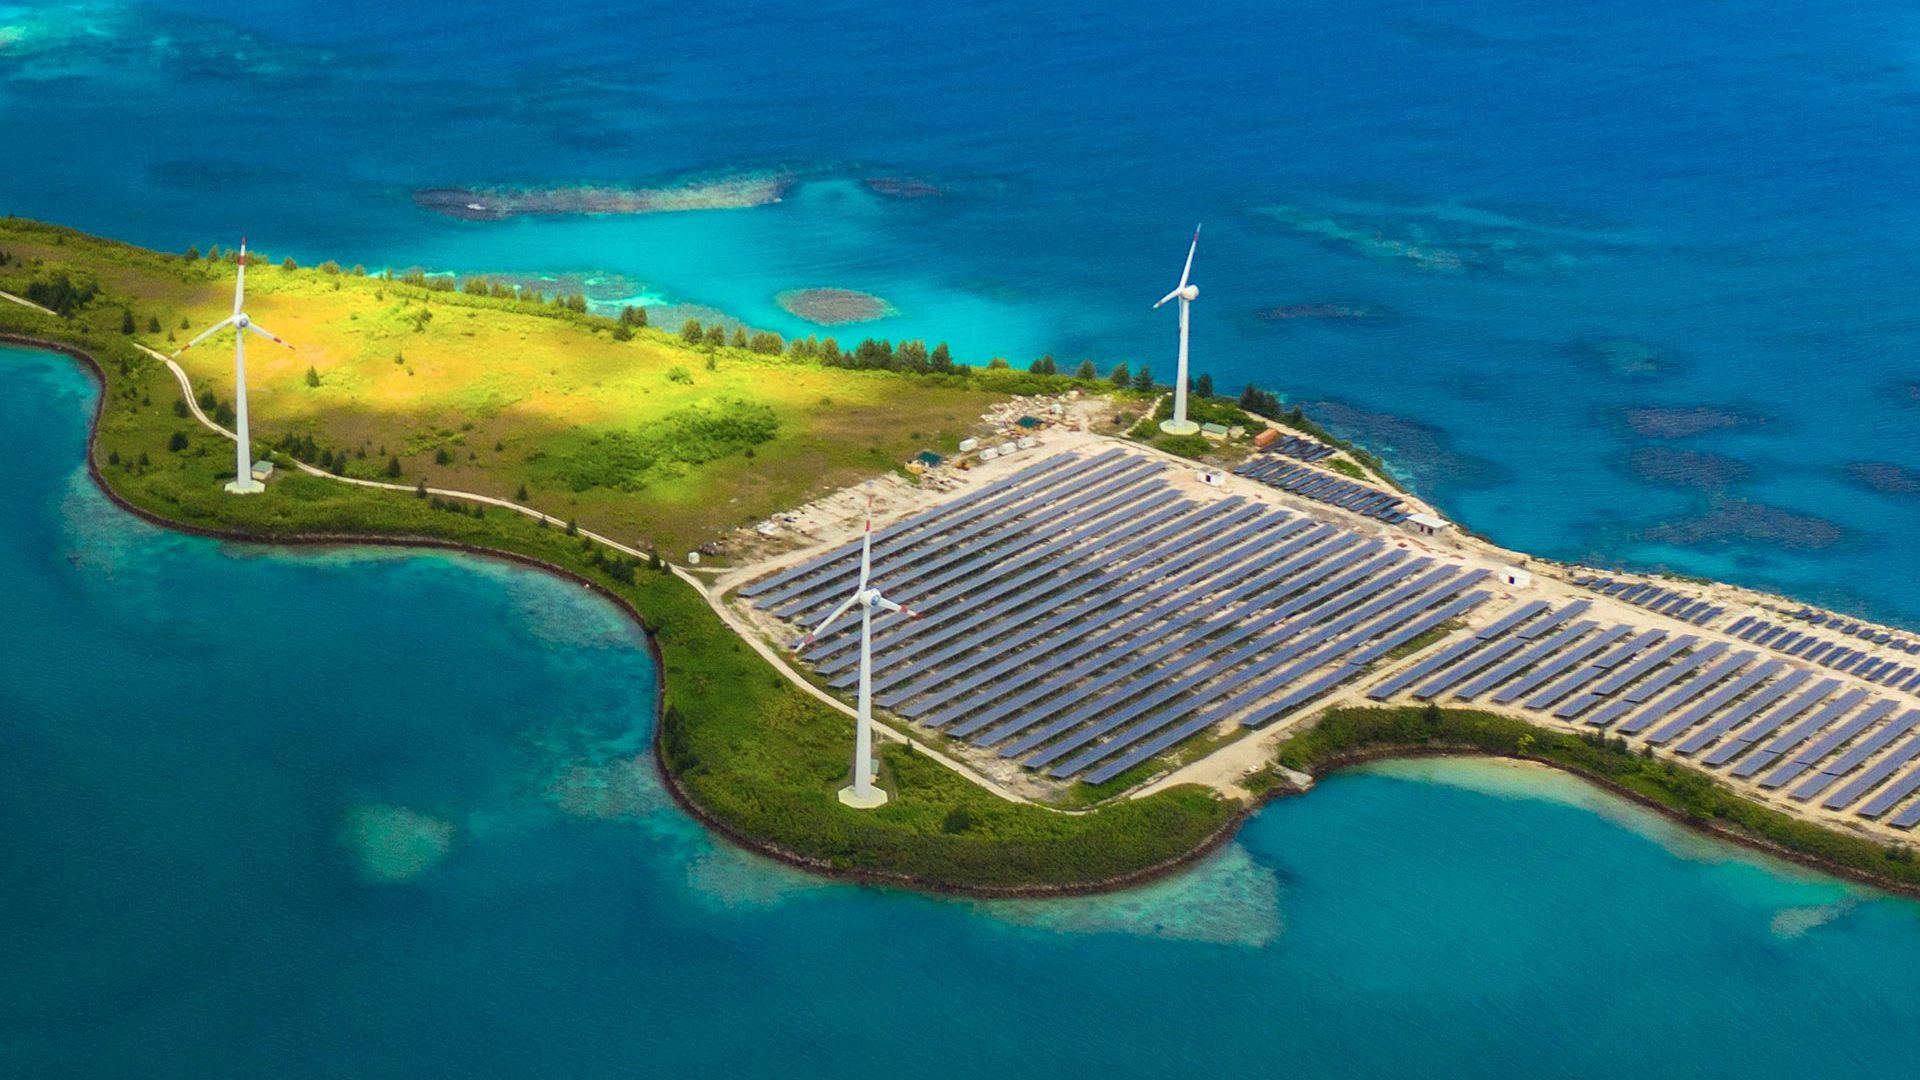 microgrid energy storage system on an island surrounded by ocean